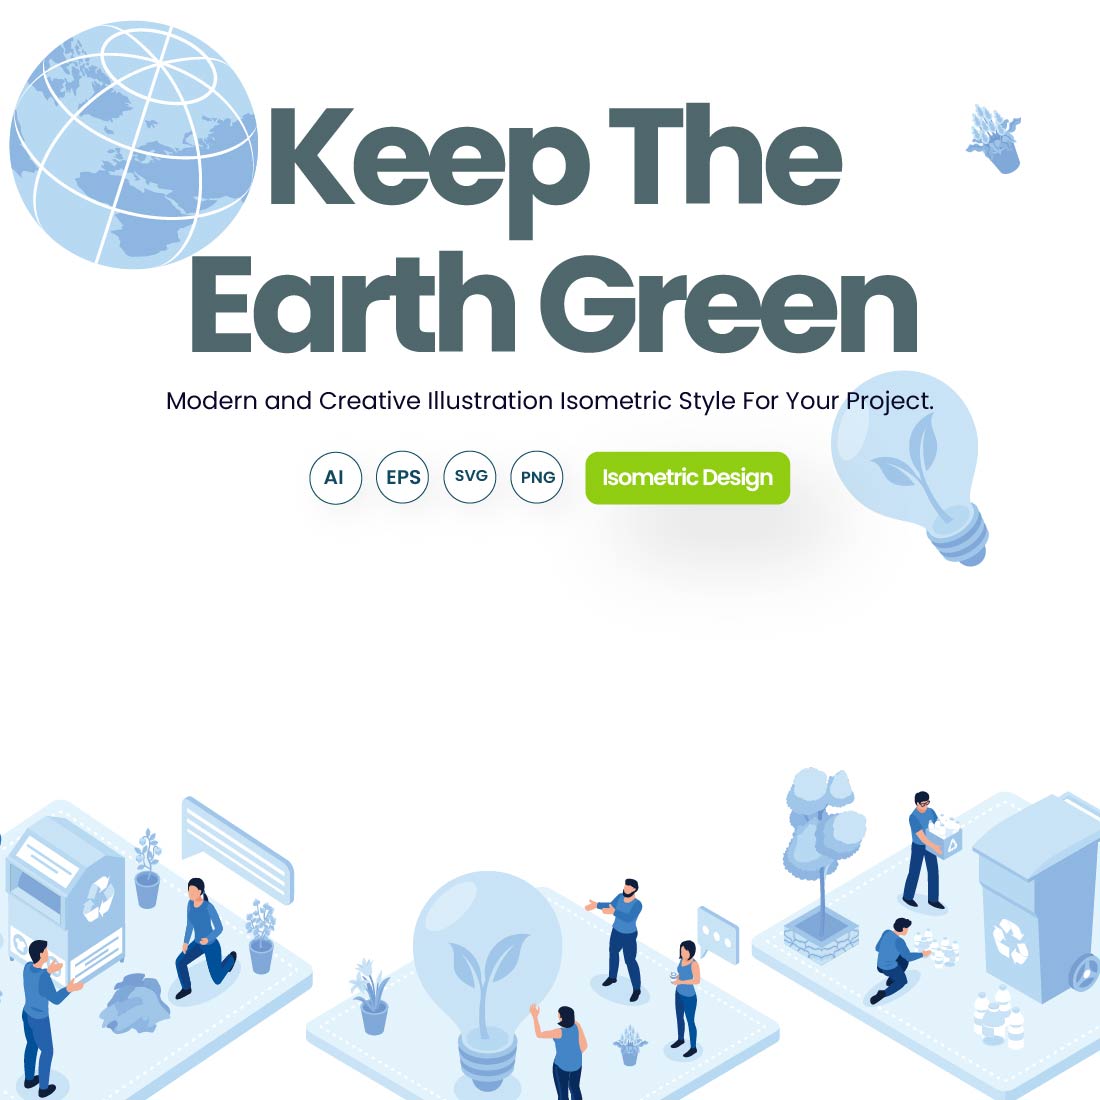 Keep The Earth Green Illustration Design cover image.